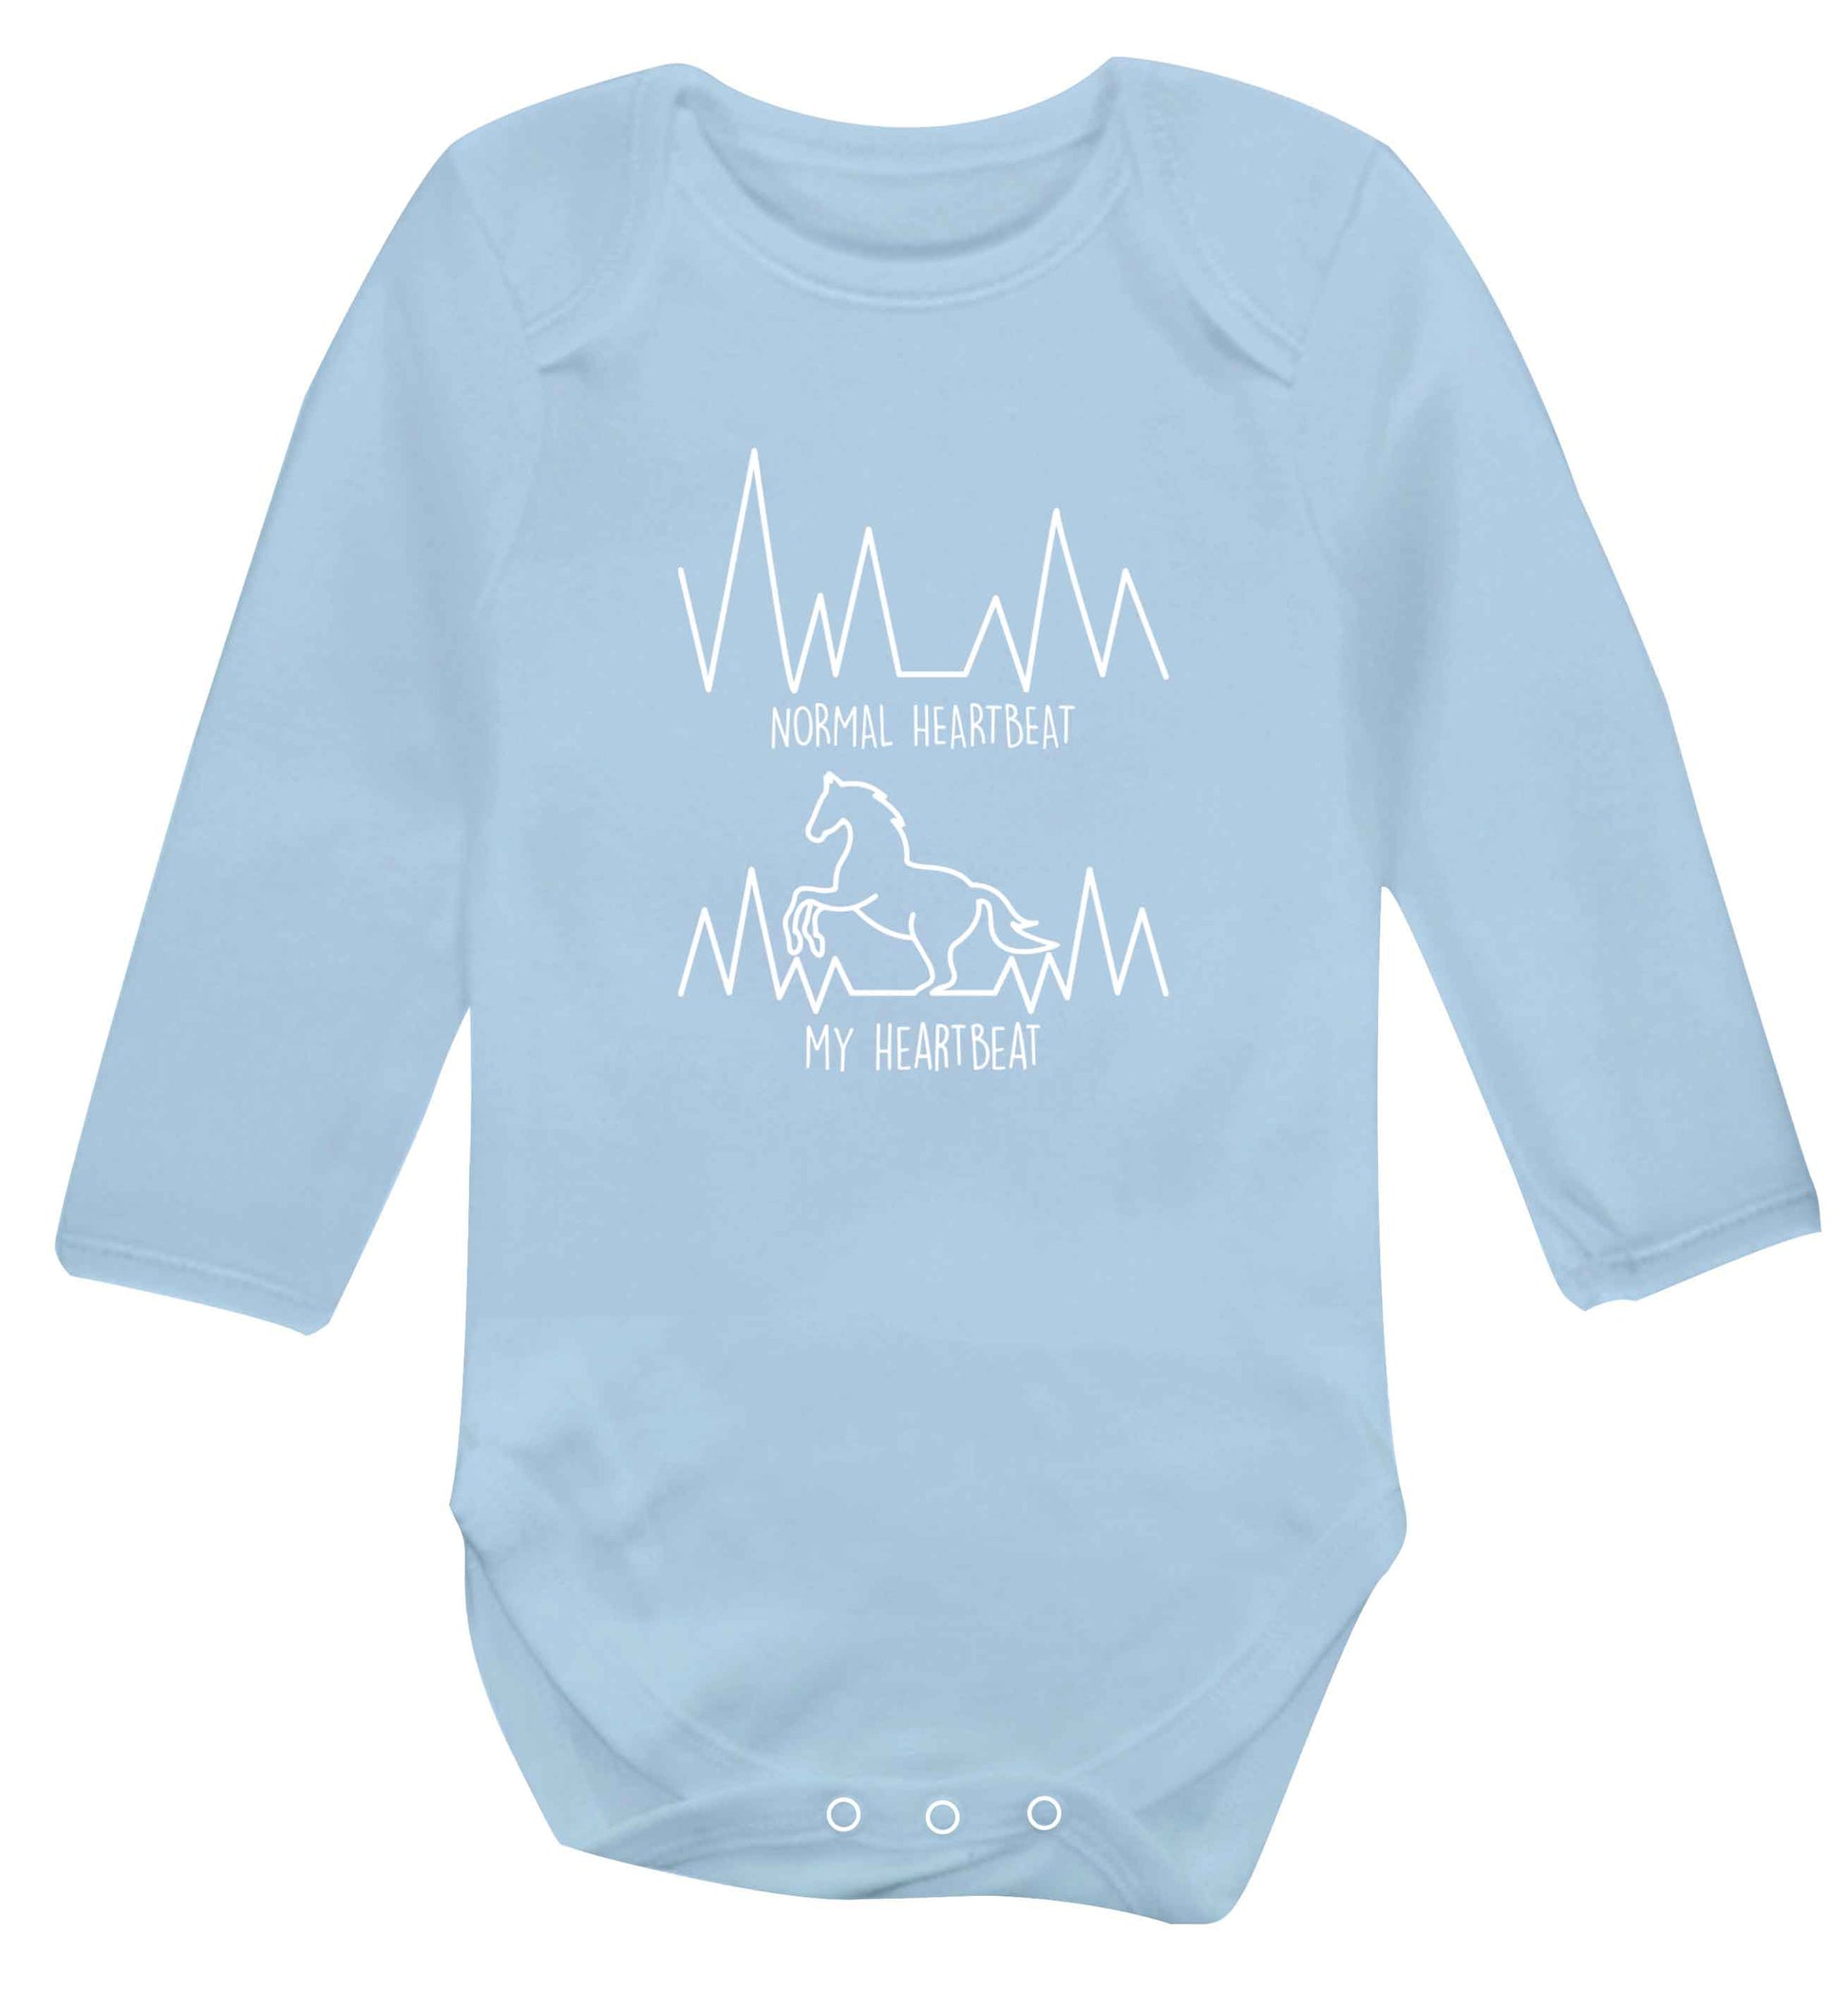 Horse - Normal heartbeat my heartbeat baby vest long sleeved pale blue 6-12 months